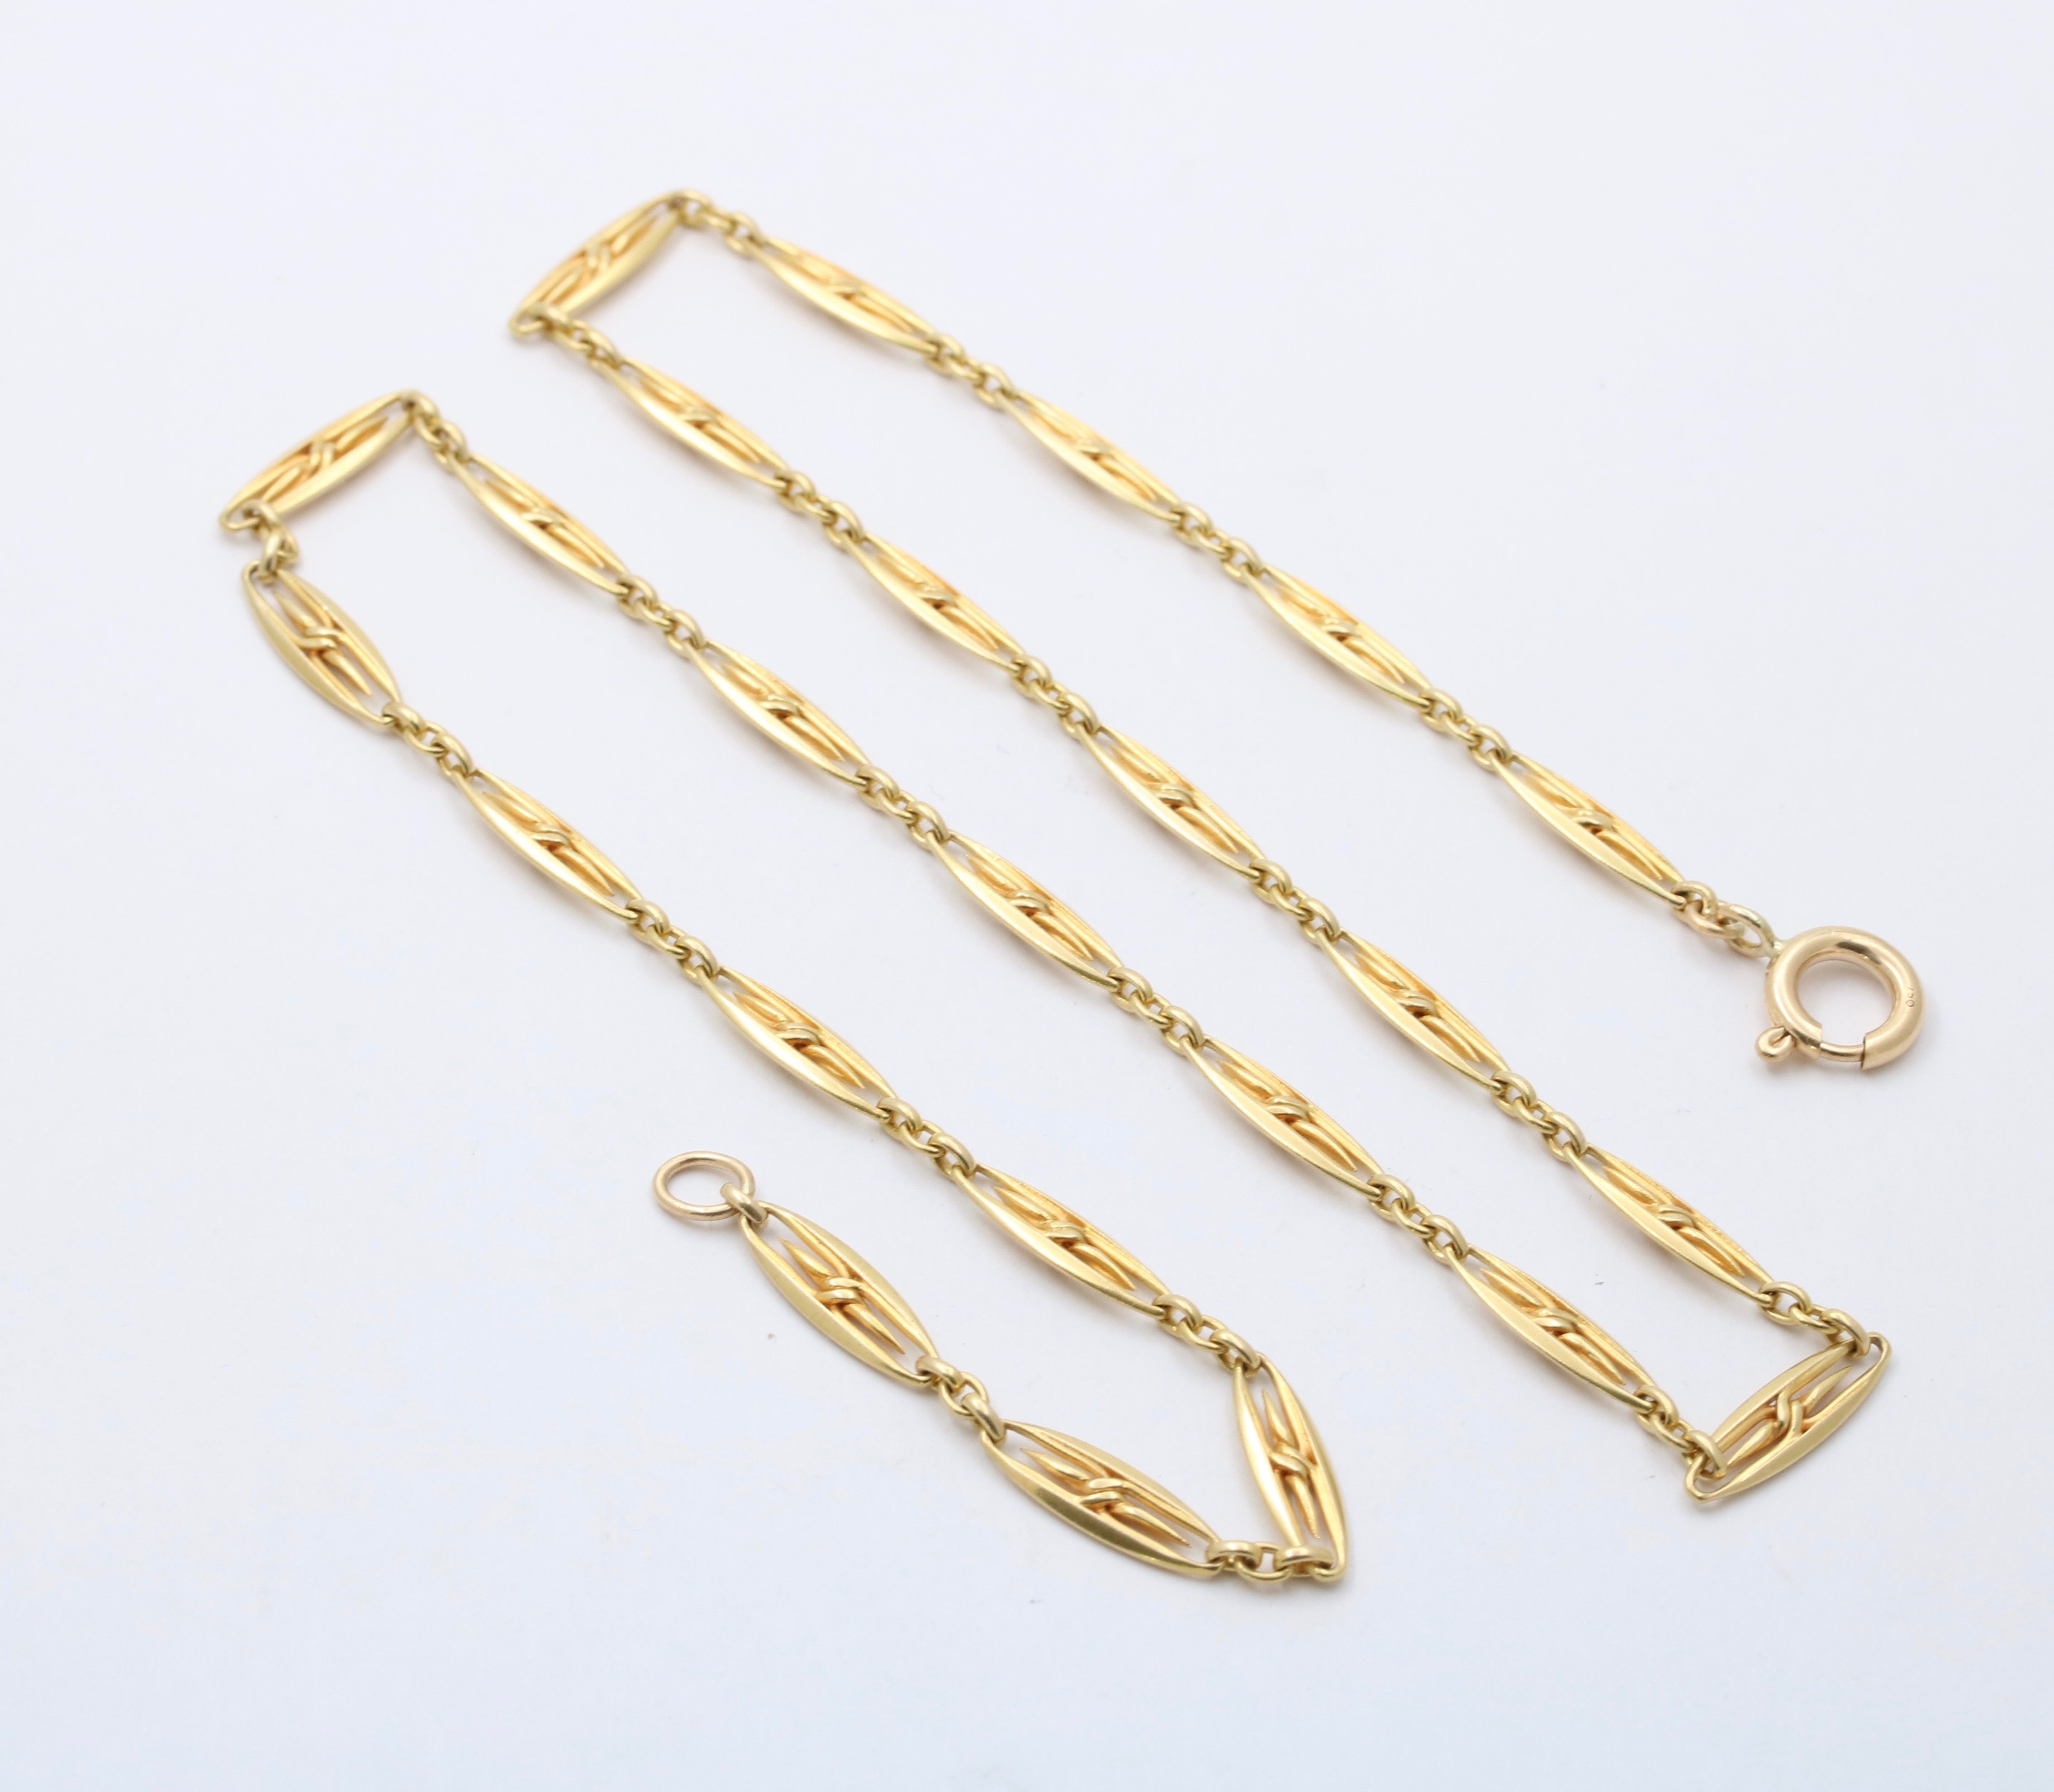 Antique Victorian Long Gold Chain, 55 Inches, in 14K #515000 – Beladora